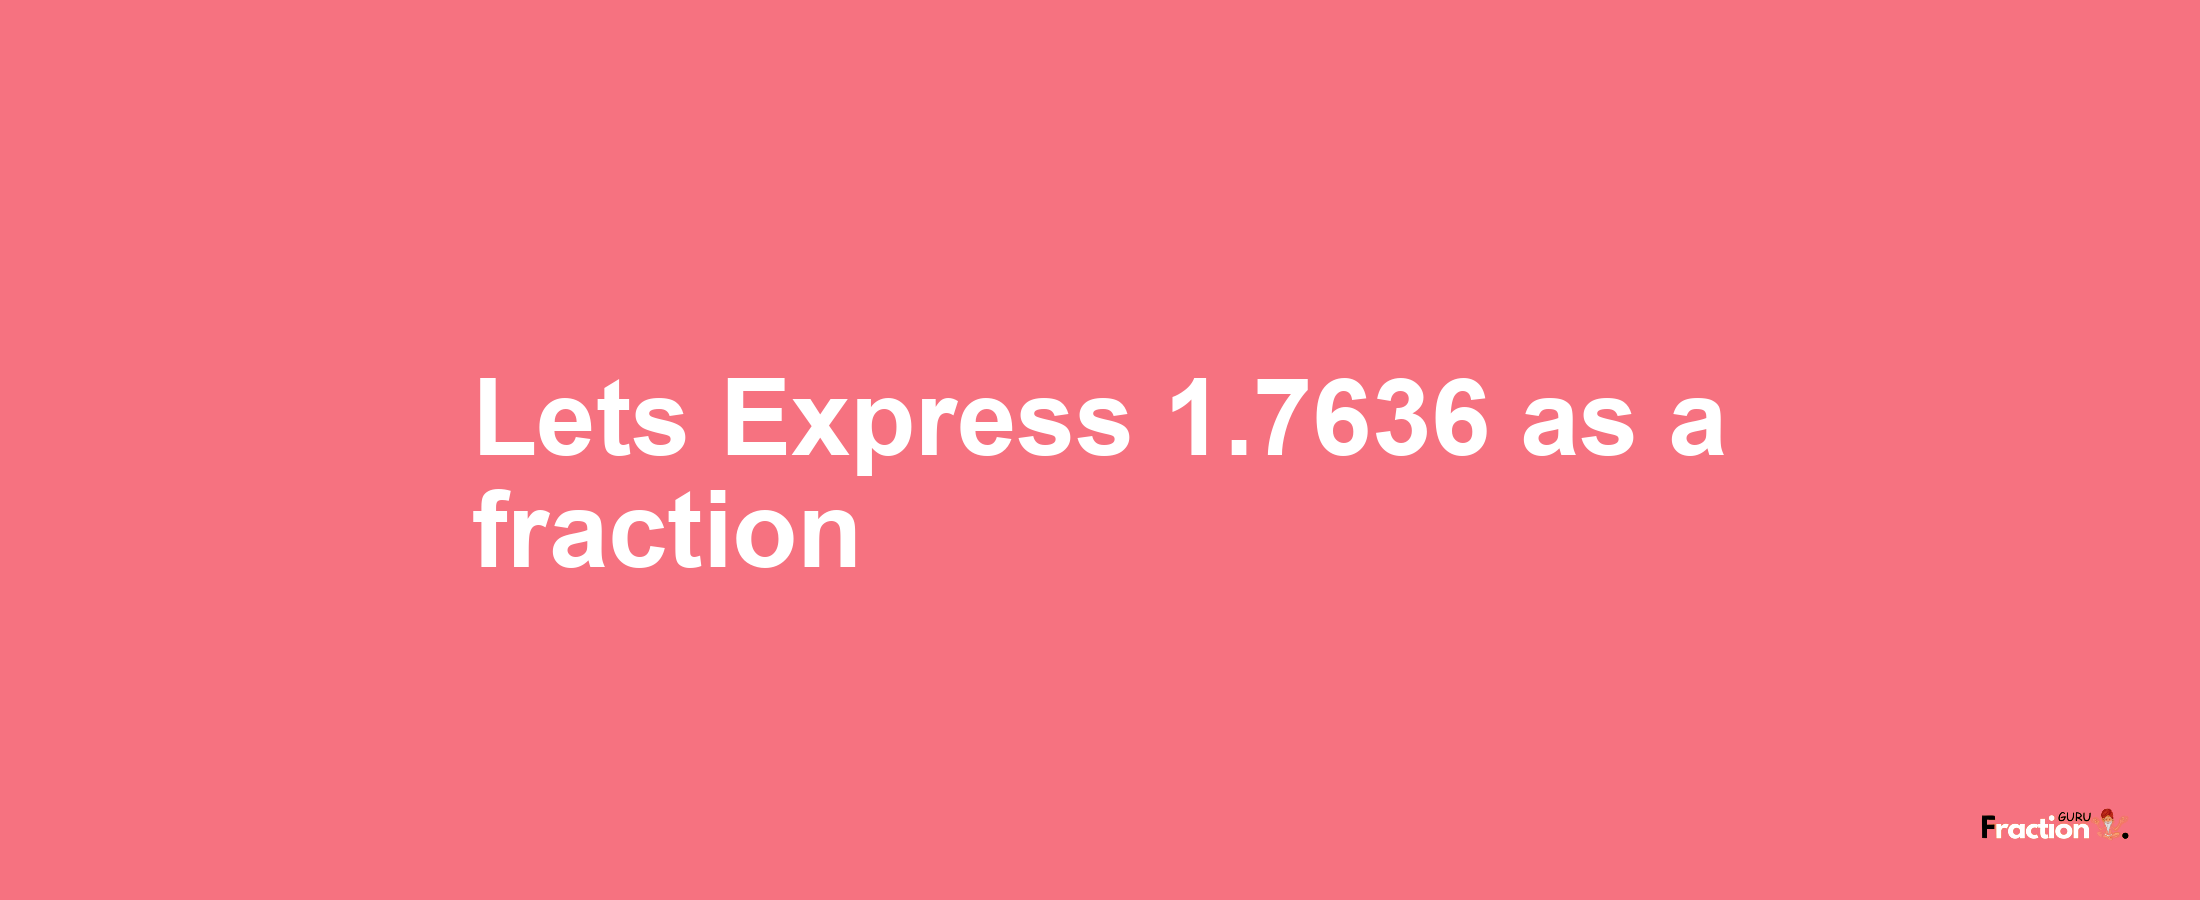 Lets Express 1.7636 as afraction